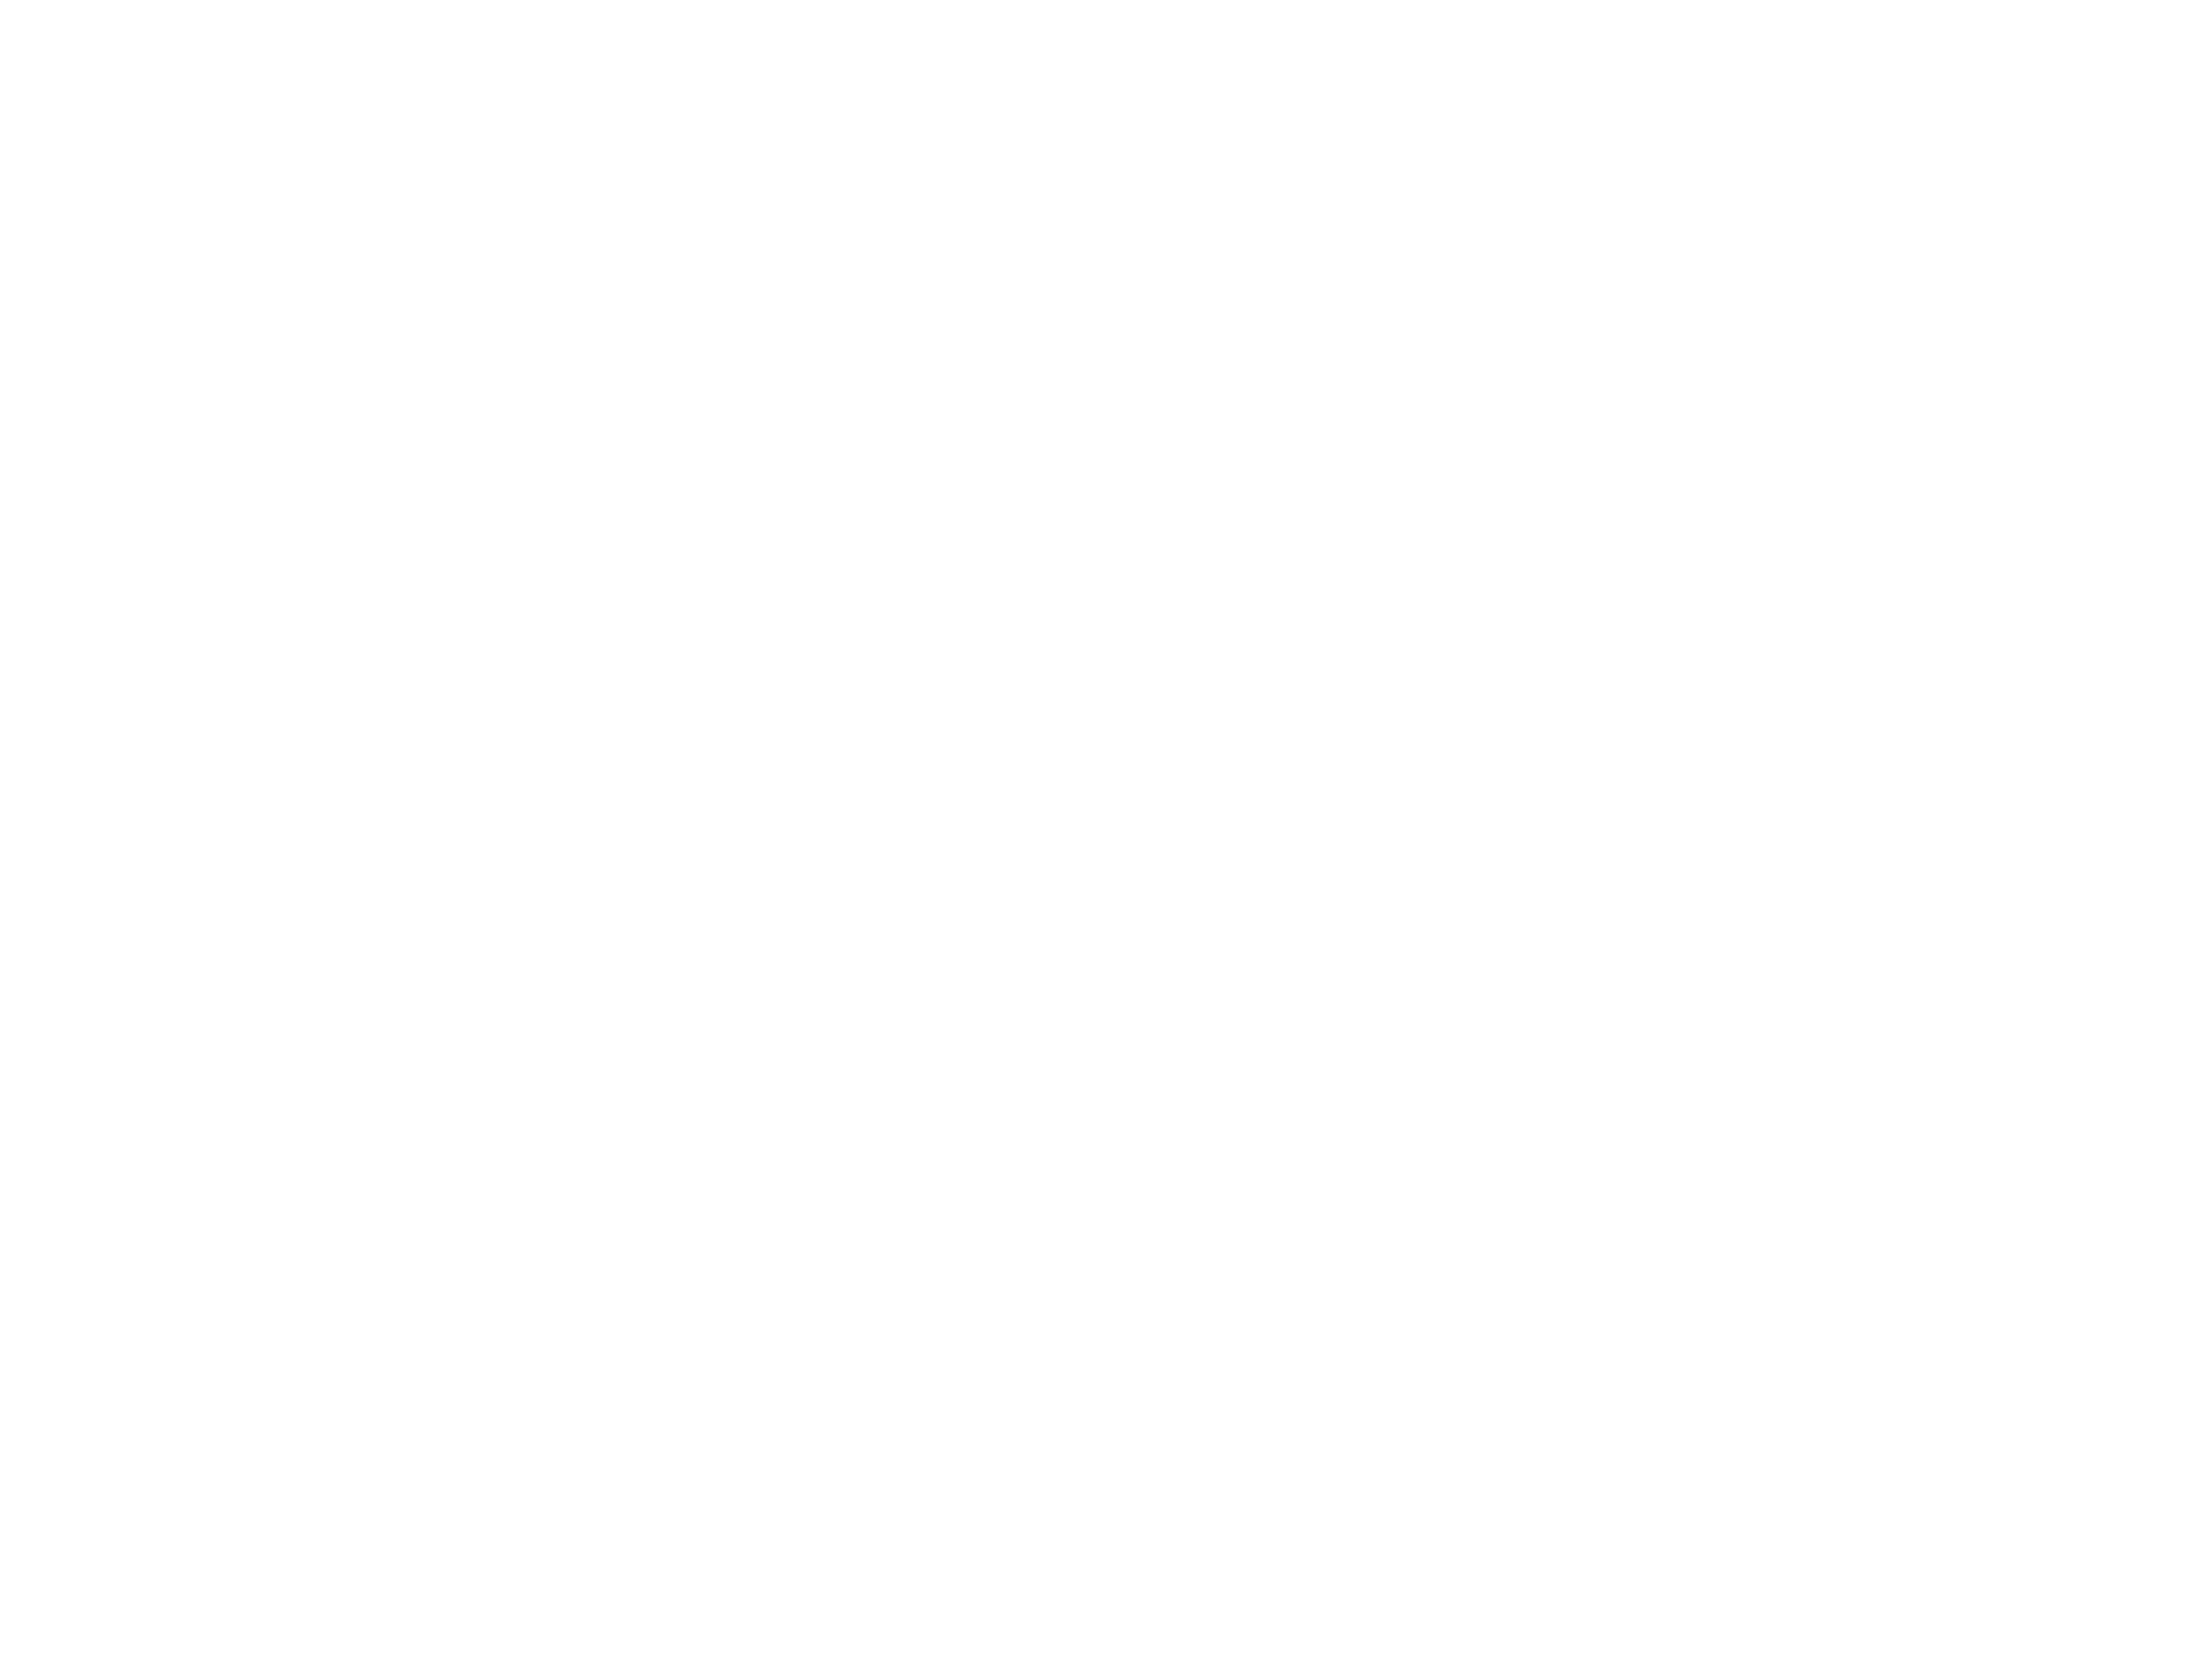 MATH TUTORING is a mathematics tutoring and enrichment project that combines face-to-face tutoring in small groups with an online platform. Its purpose is to support those students who need it most in learning mathematics.